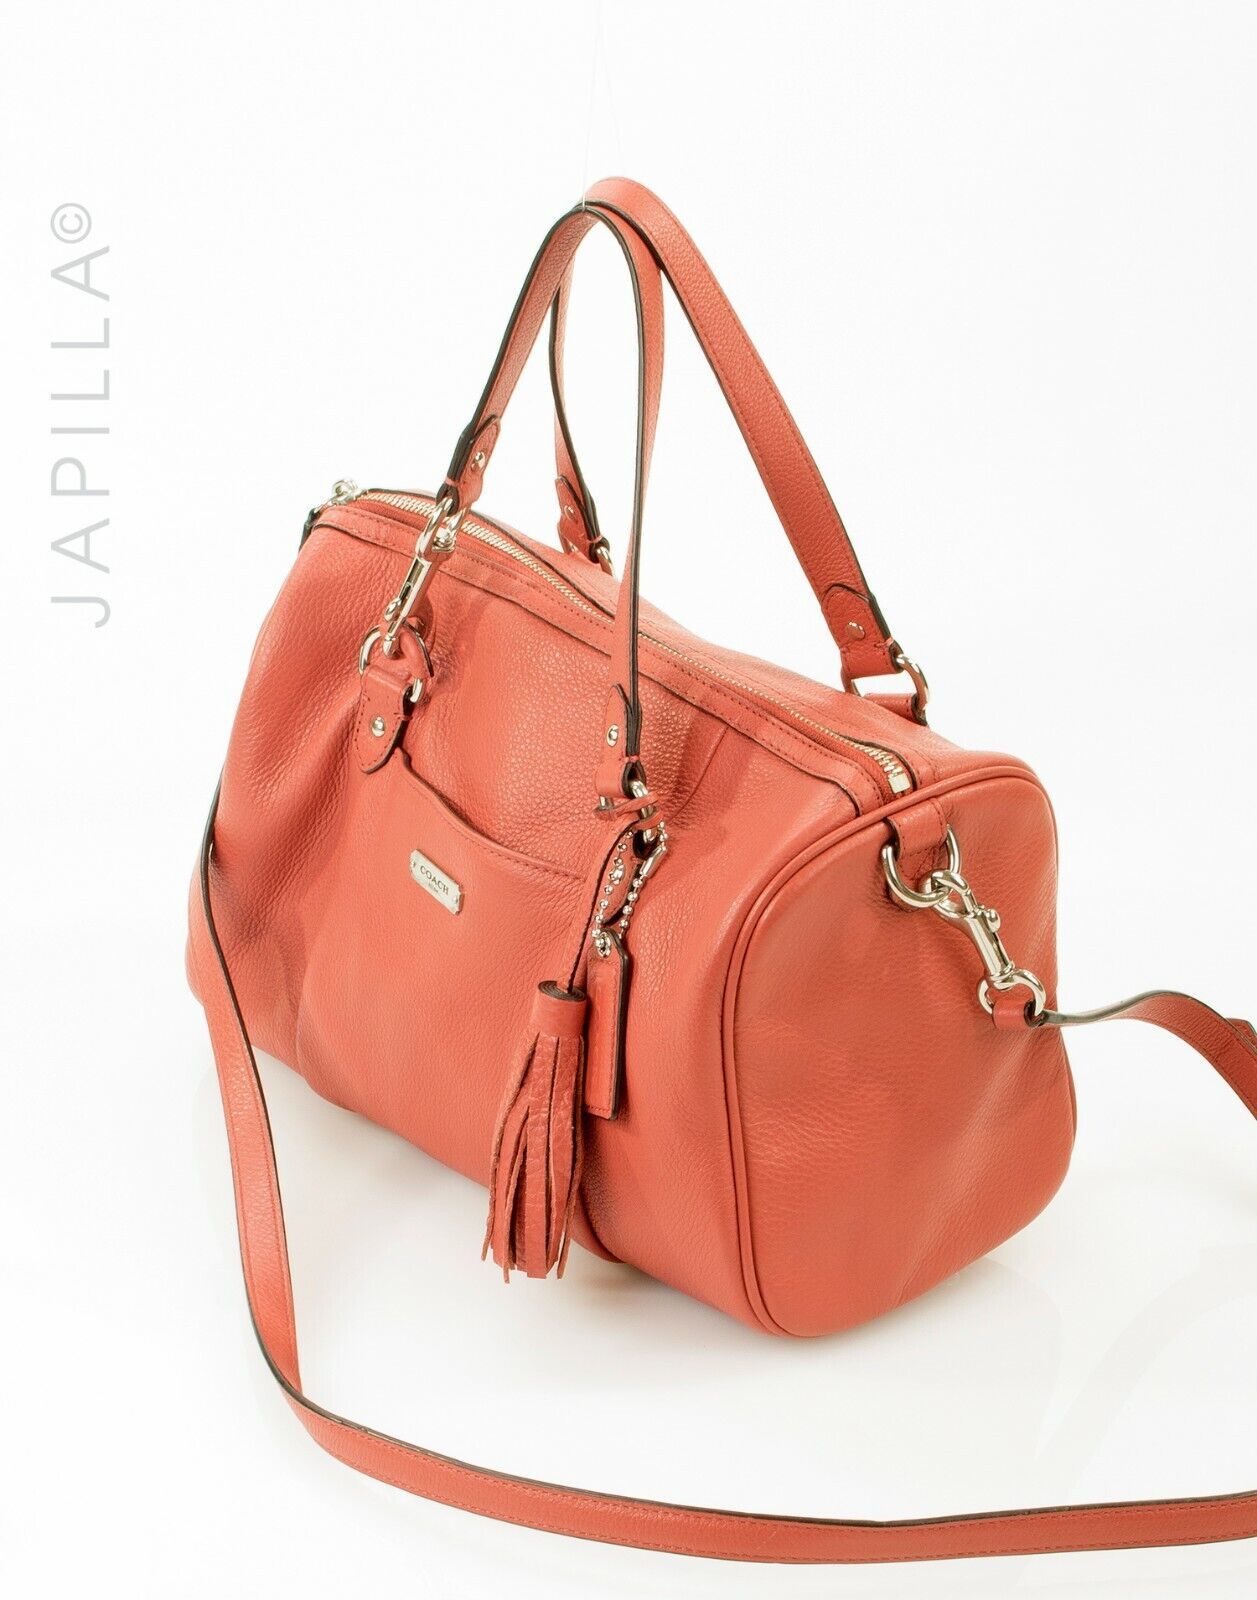 Primary image for LOVELY COACH AVERY CORAL PEBBLED TASSEL LEATHER SATCHEL PURSE F26121!